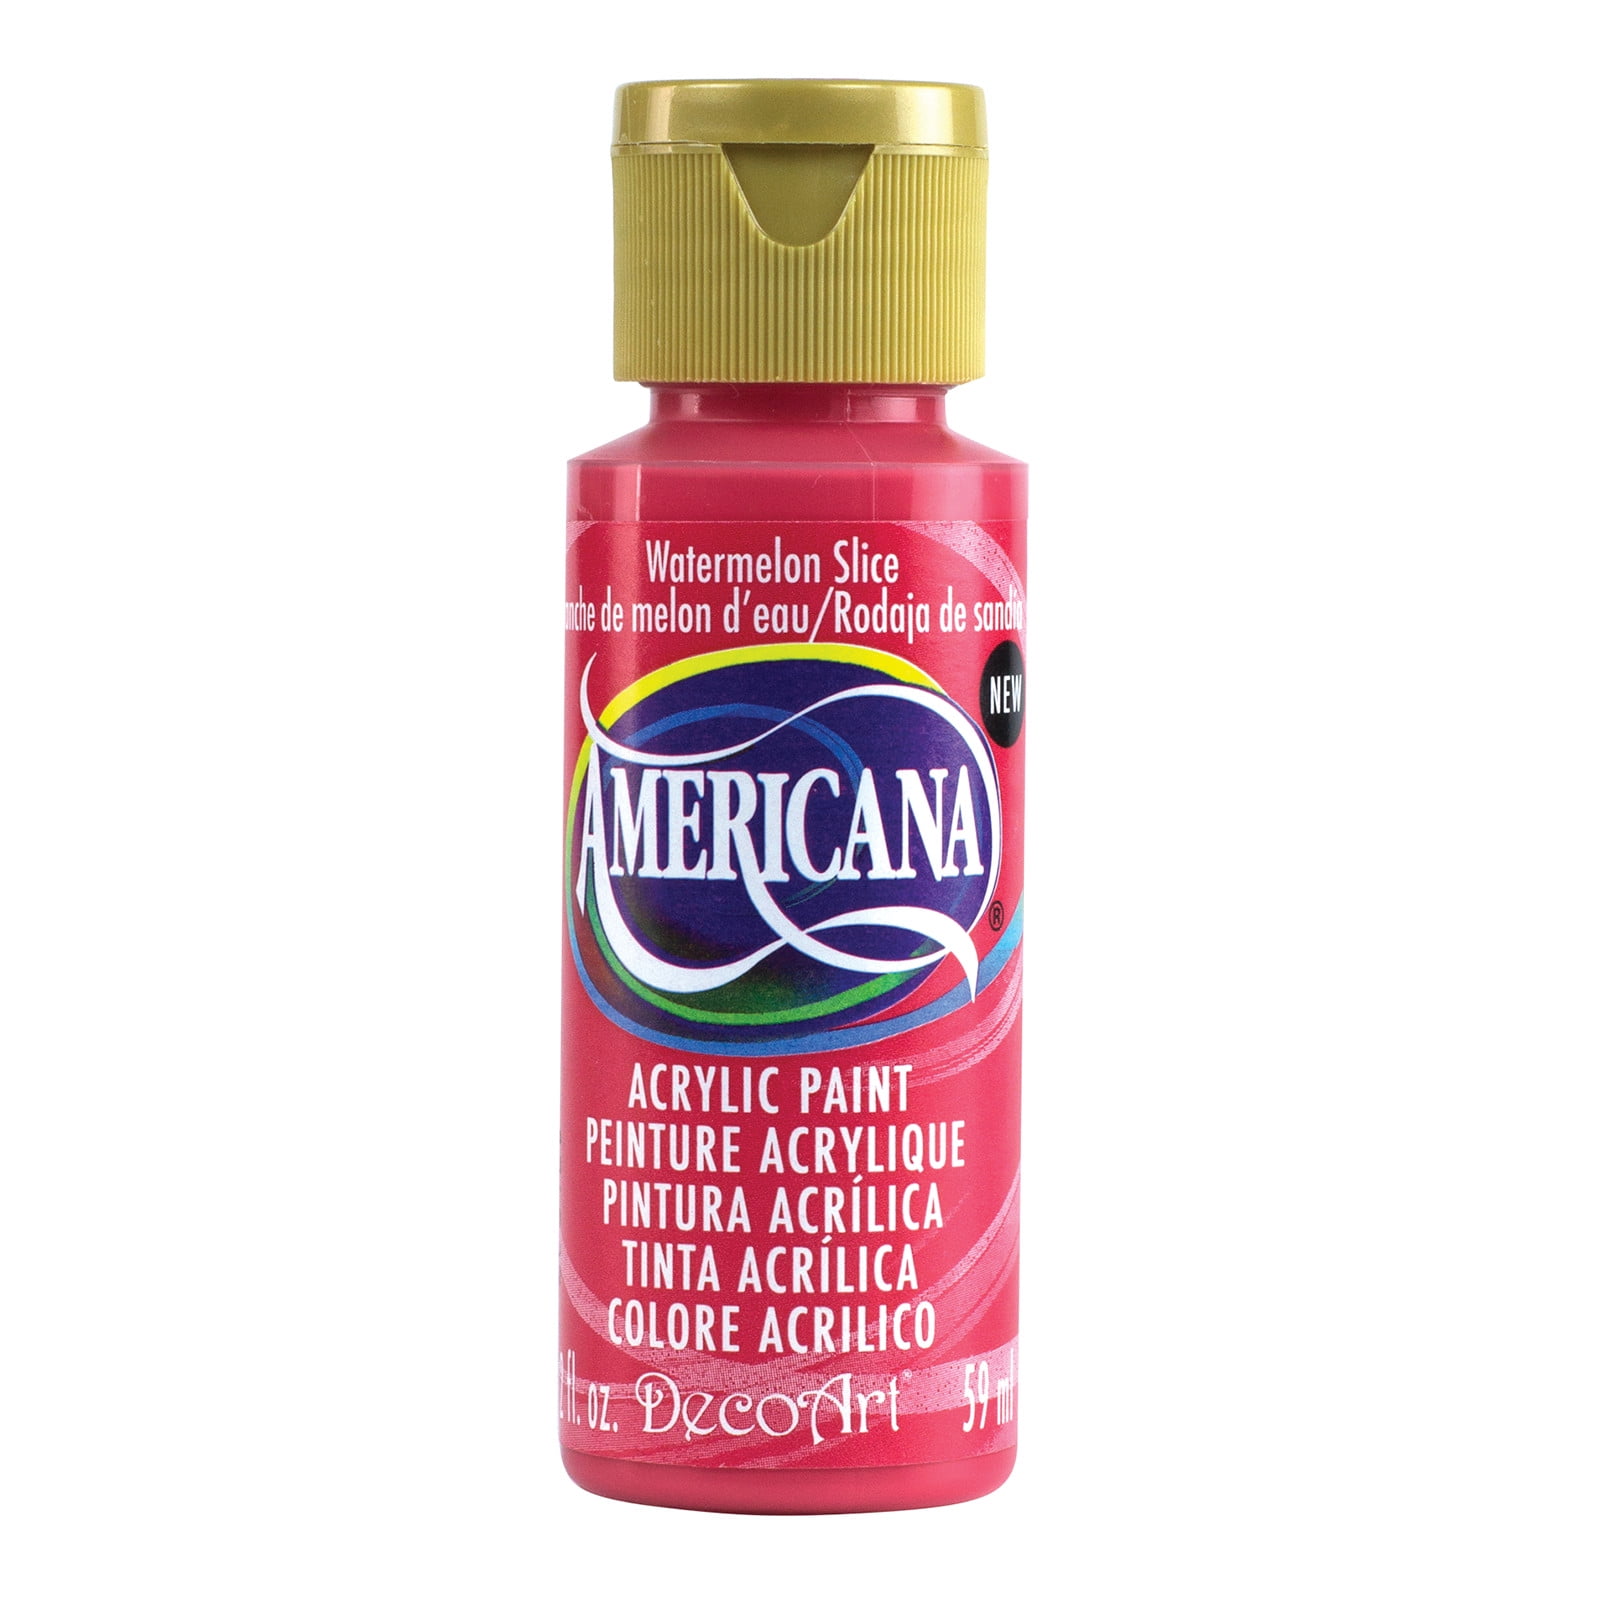 Americana Acrylic Paint 2oz-Tuscan Red - Semi-Opaque, 1 count - Kroger